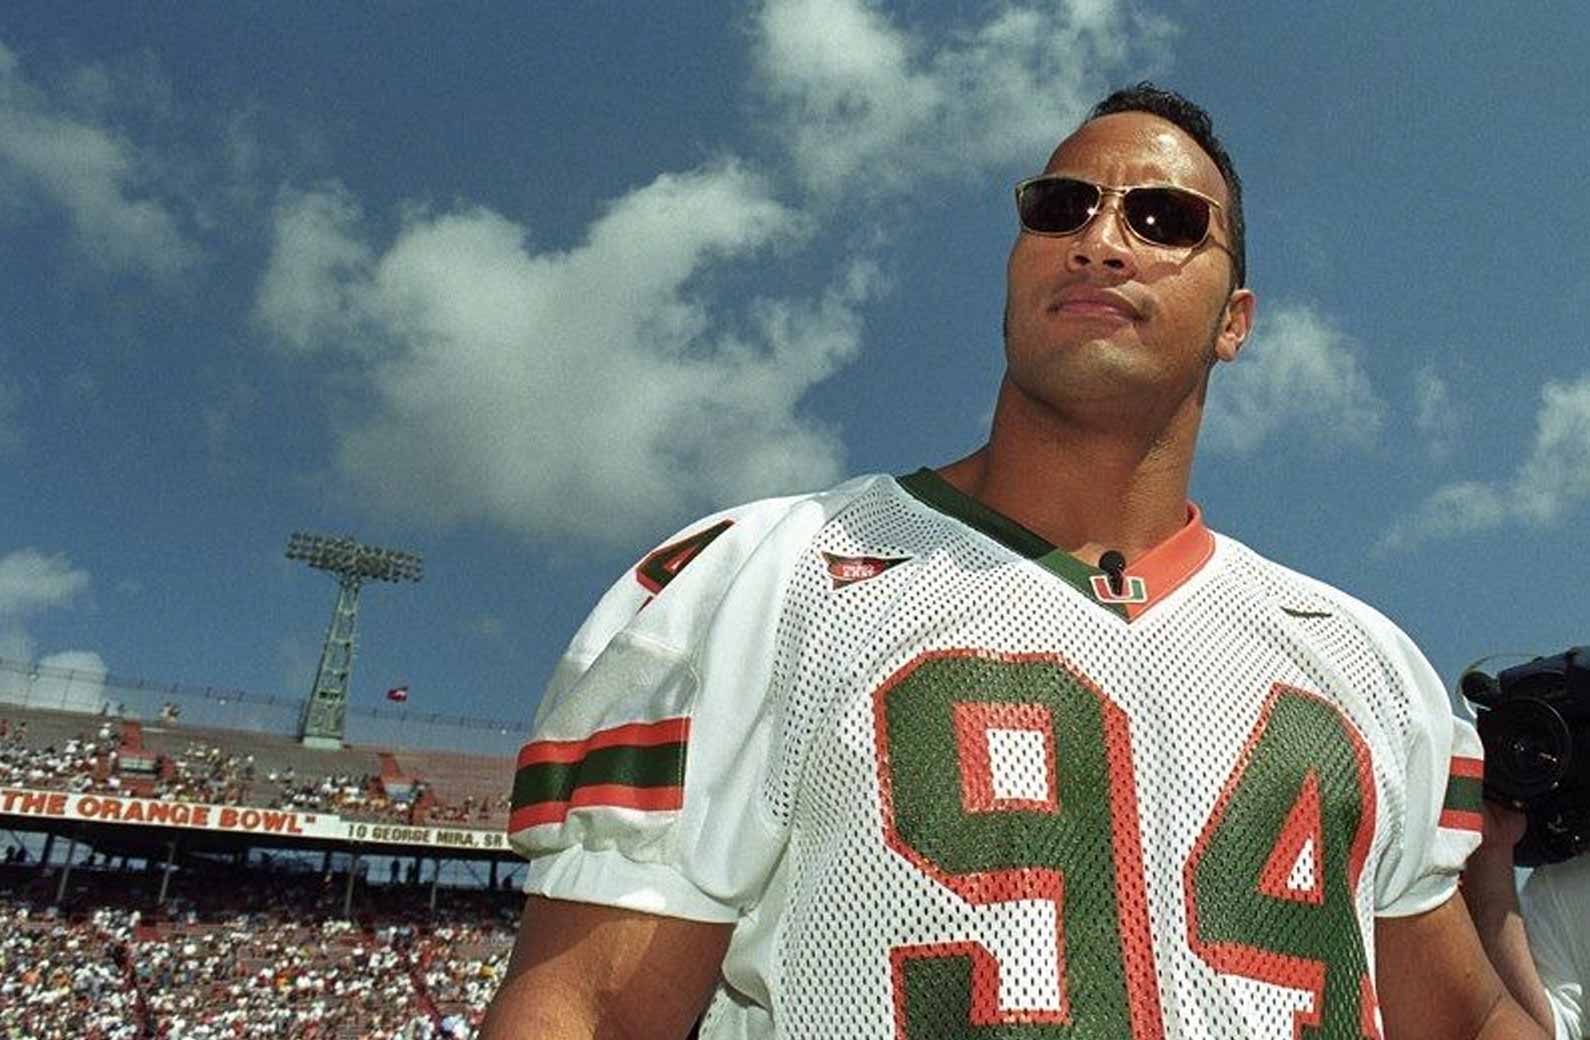 The Rock is a celeb that played with an NFL hall of famer.